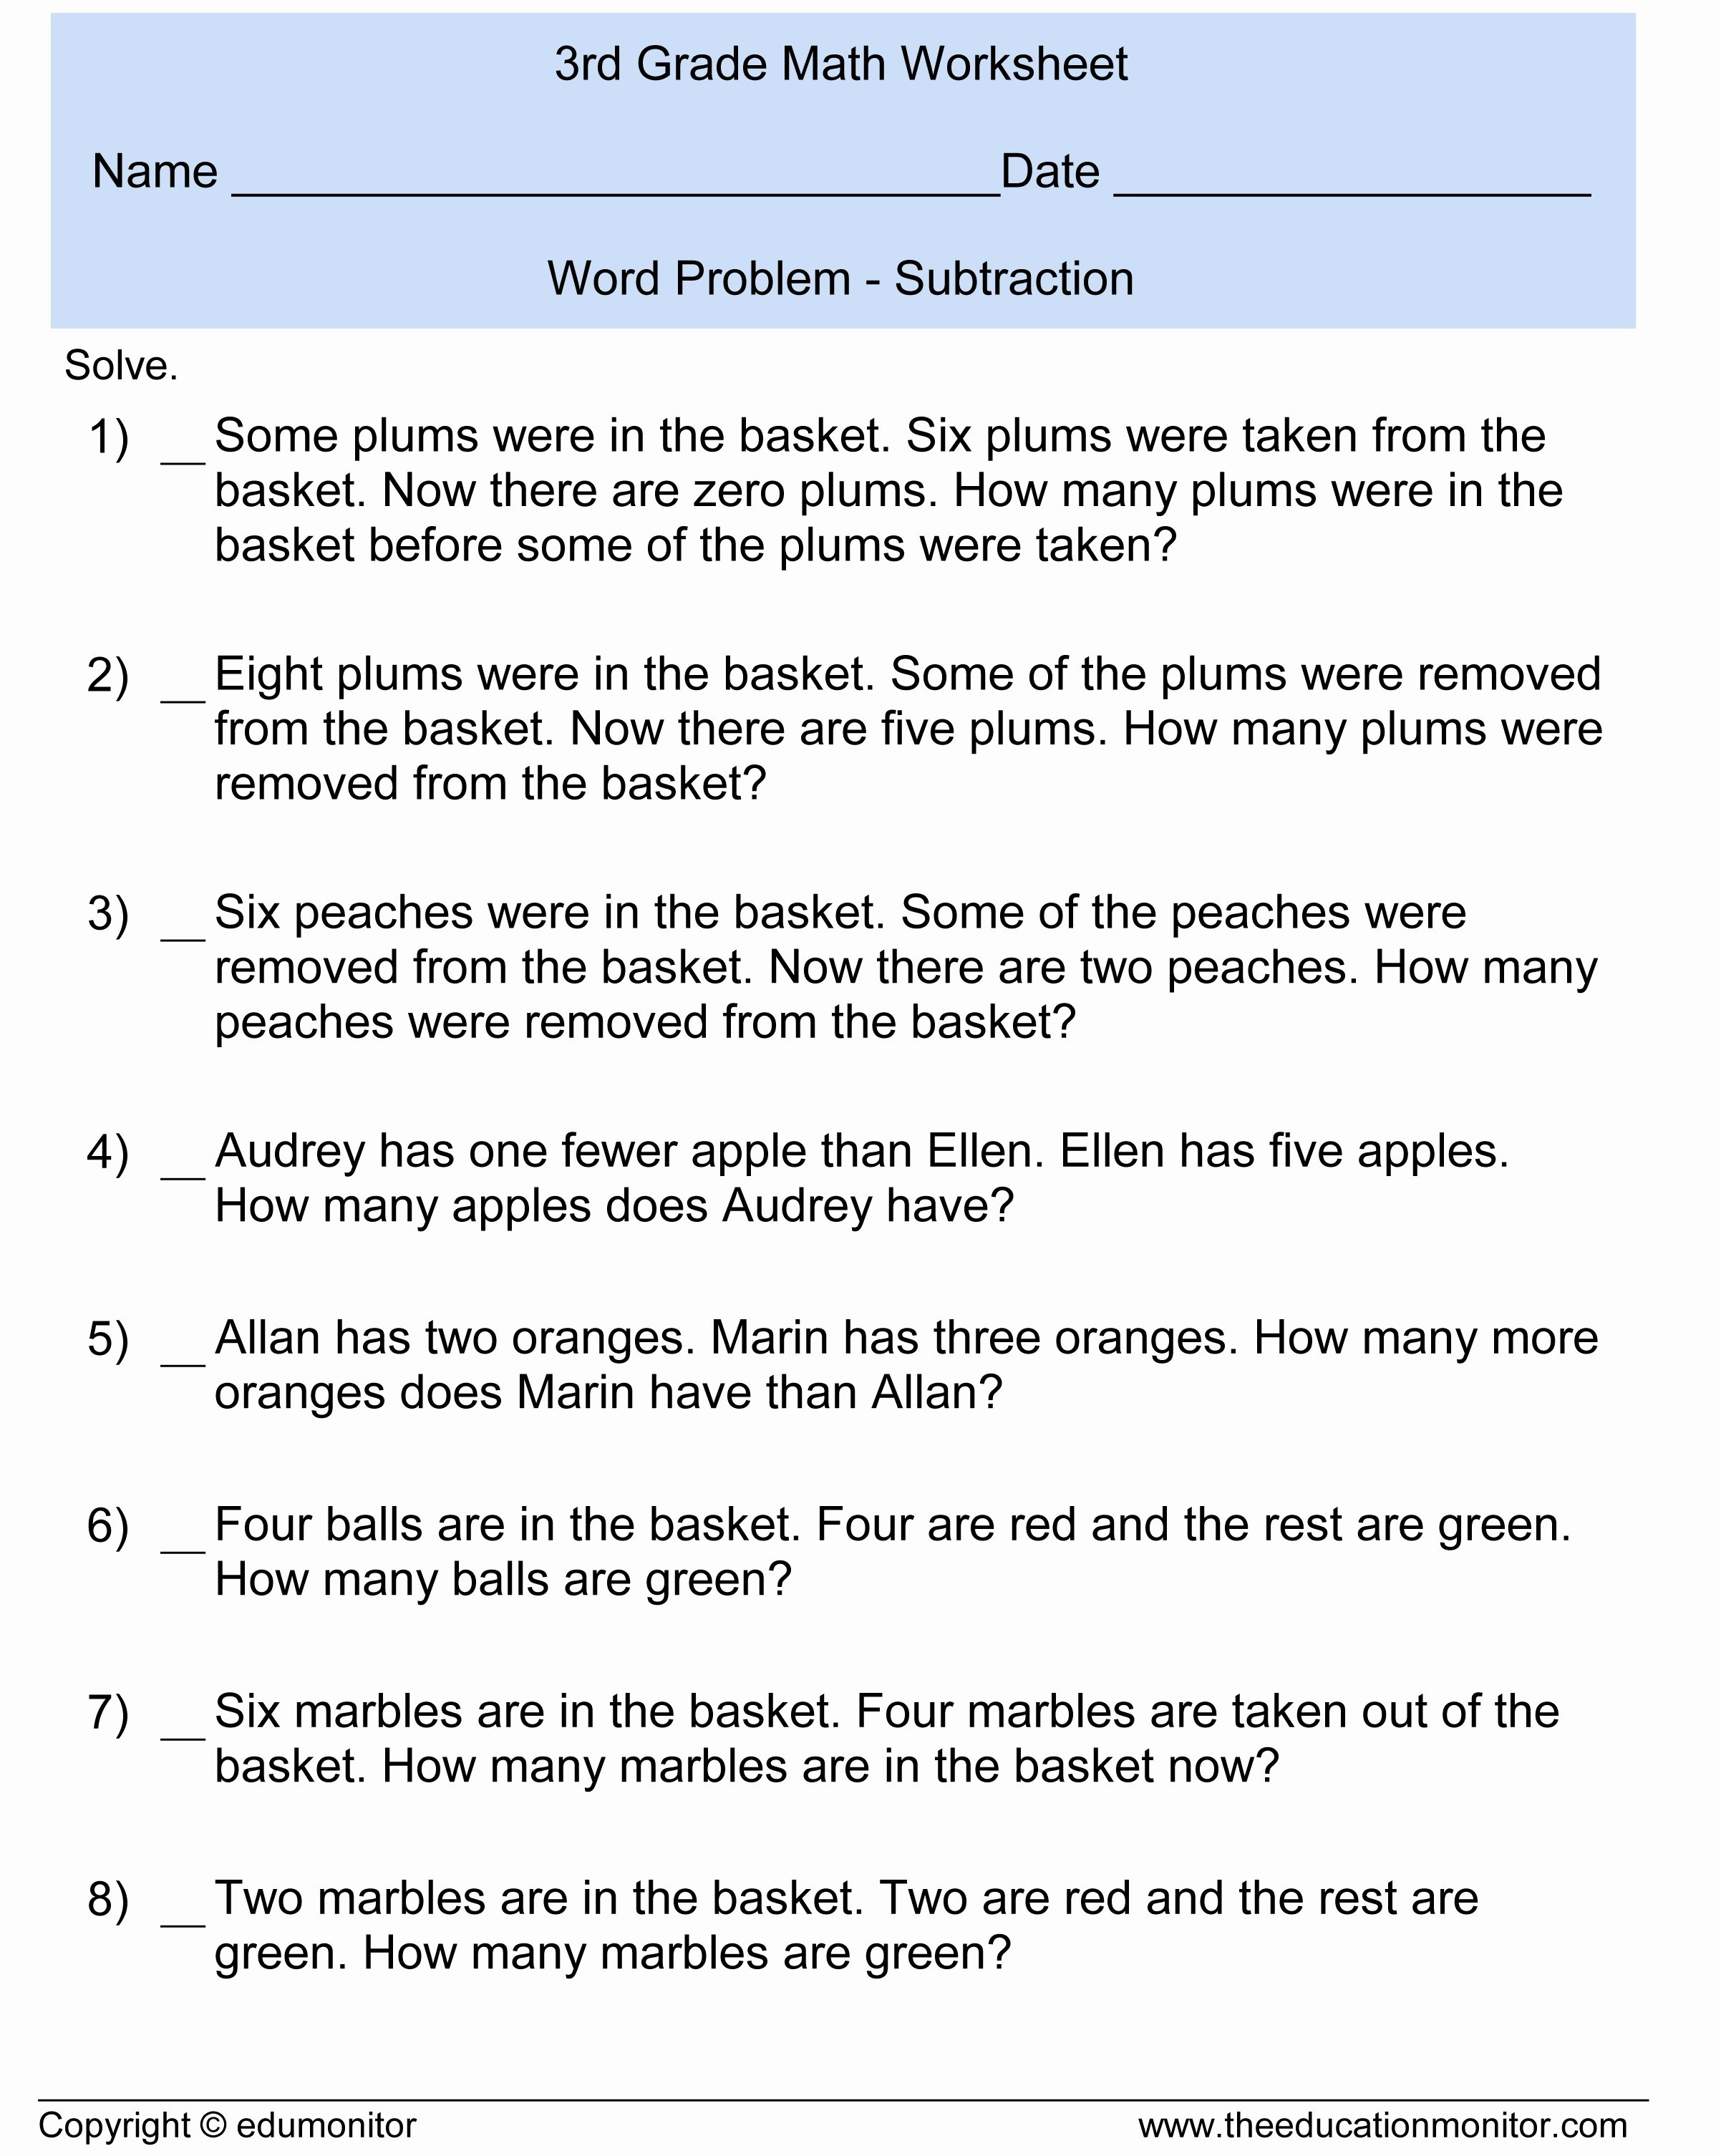 7Th Grade Proportions Worksheet Unique Proportion Word Db excel